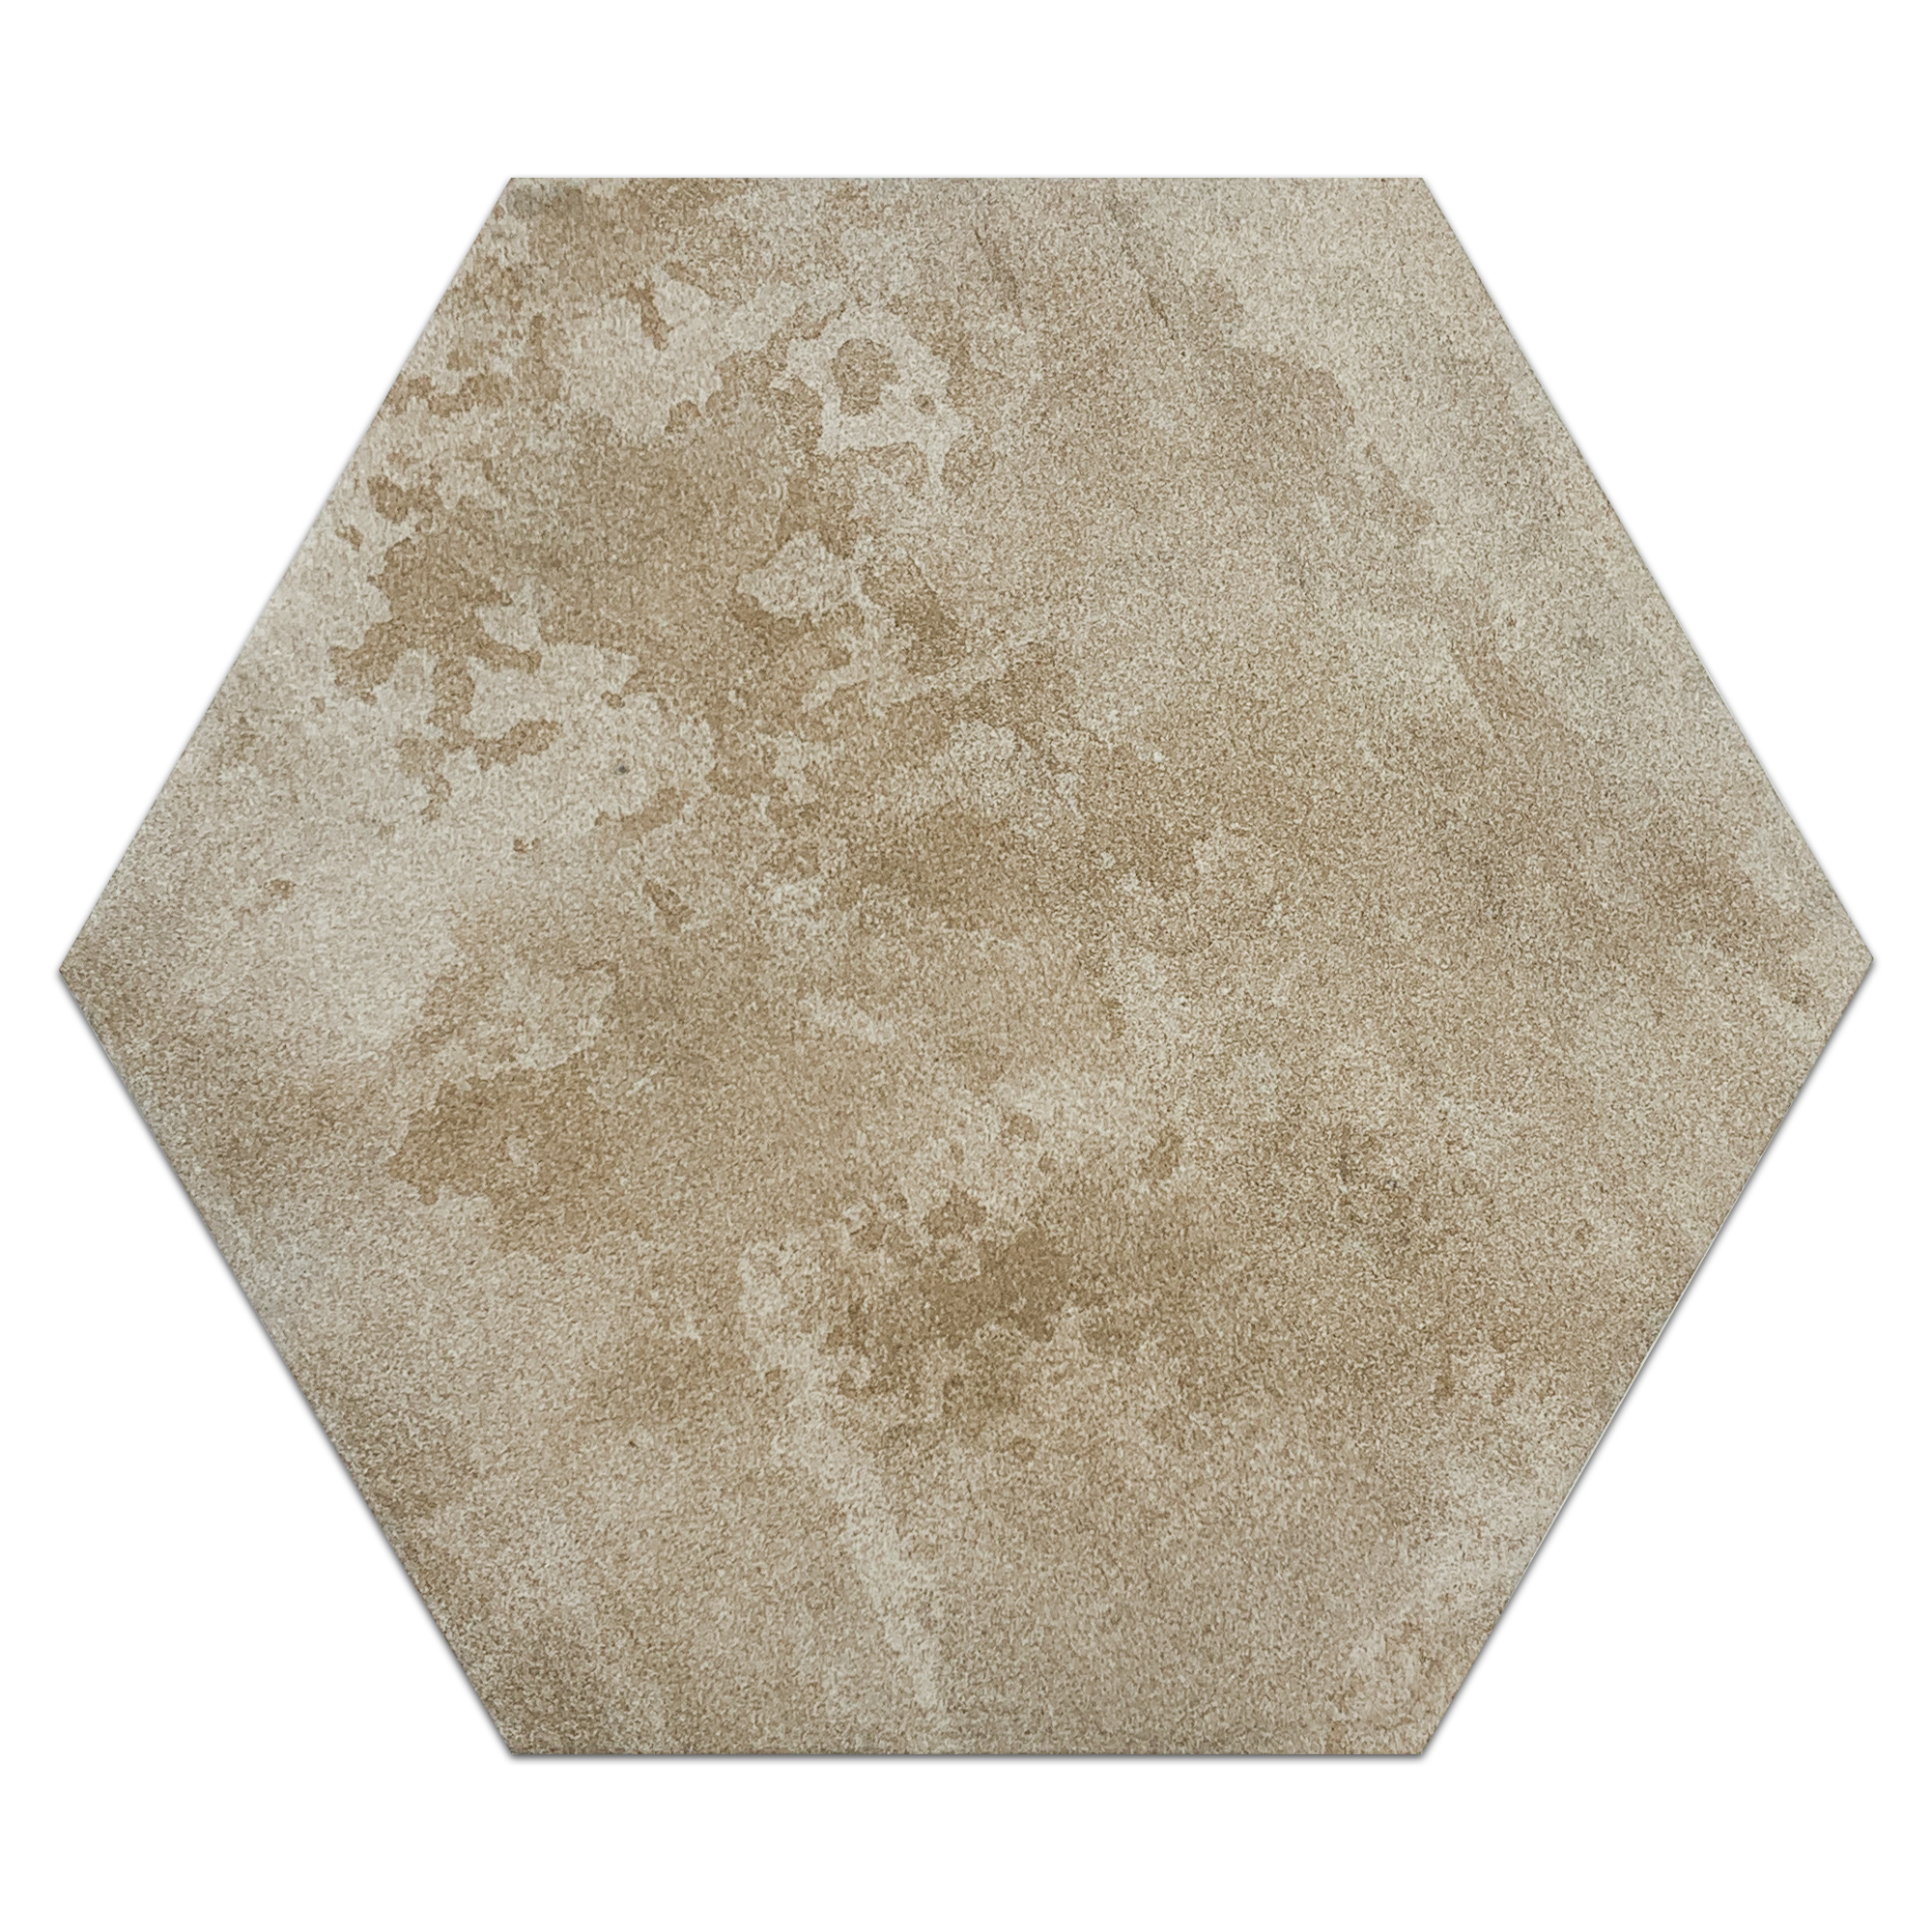 Alt text: "Elon Boston Brick Downtown Porcelain Hexagon Field Tile, 11.2x12.7x0.375 inches, natural pressed finish, SKU BC116, available at Surface Group International."